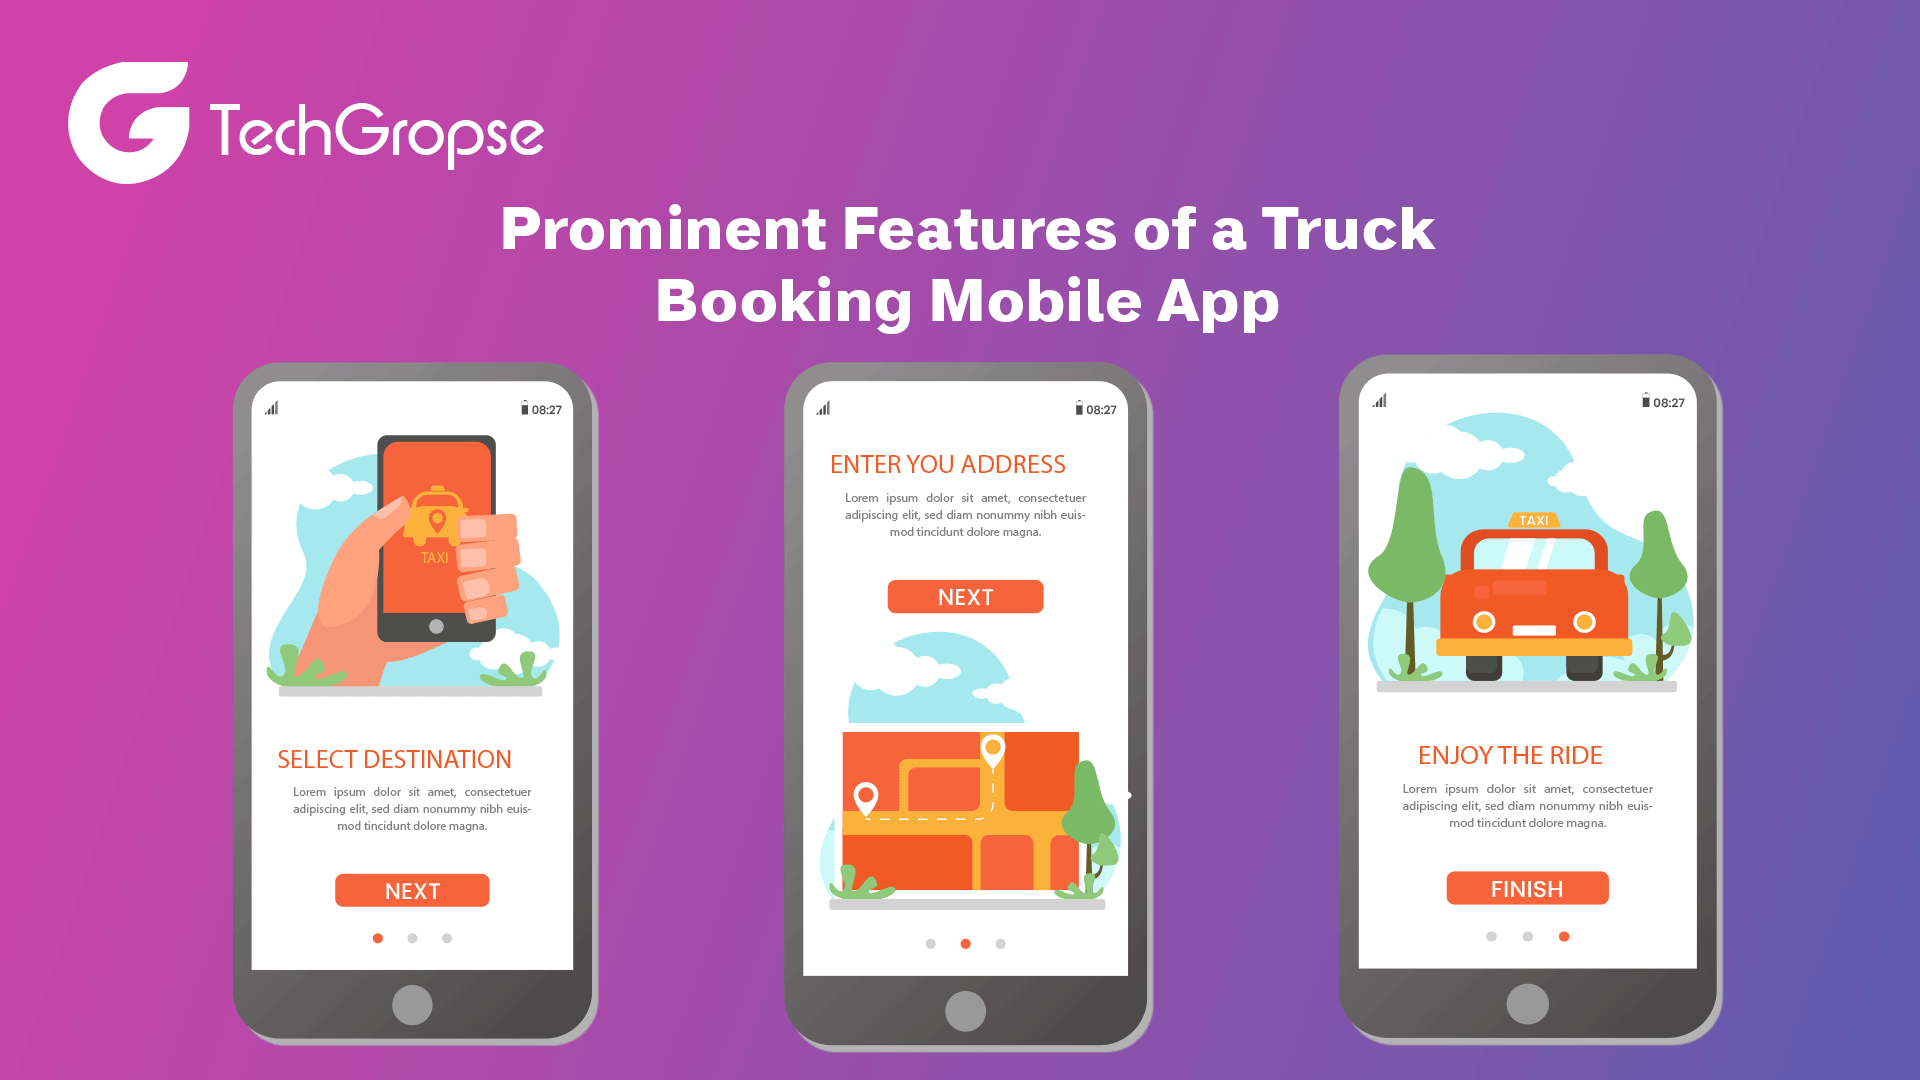 Prominent Features of a Truck Booking Mobile App